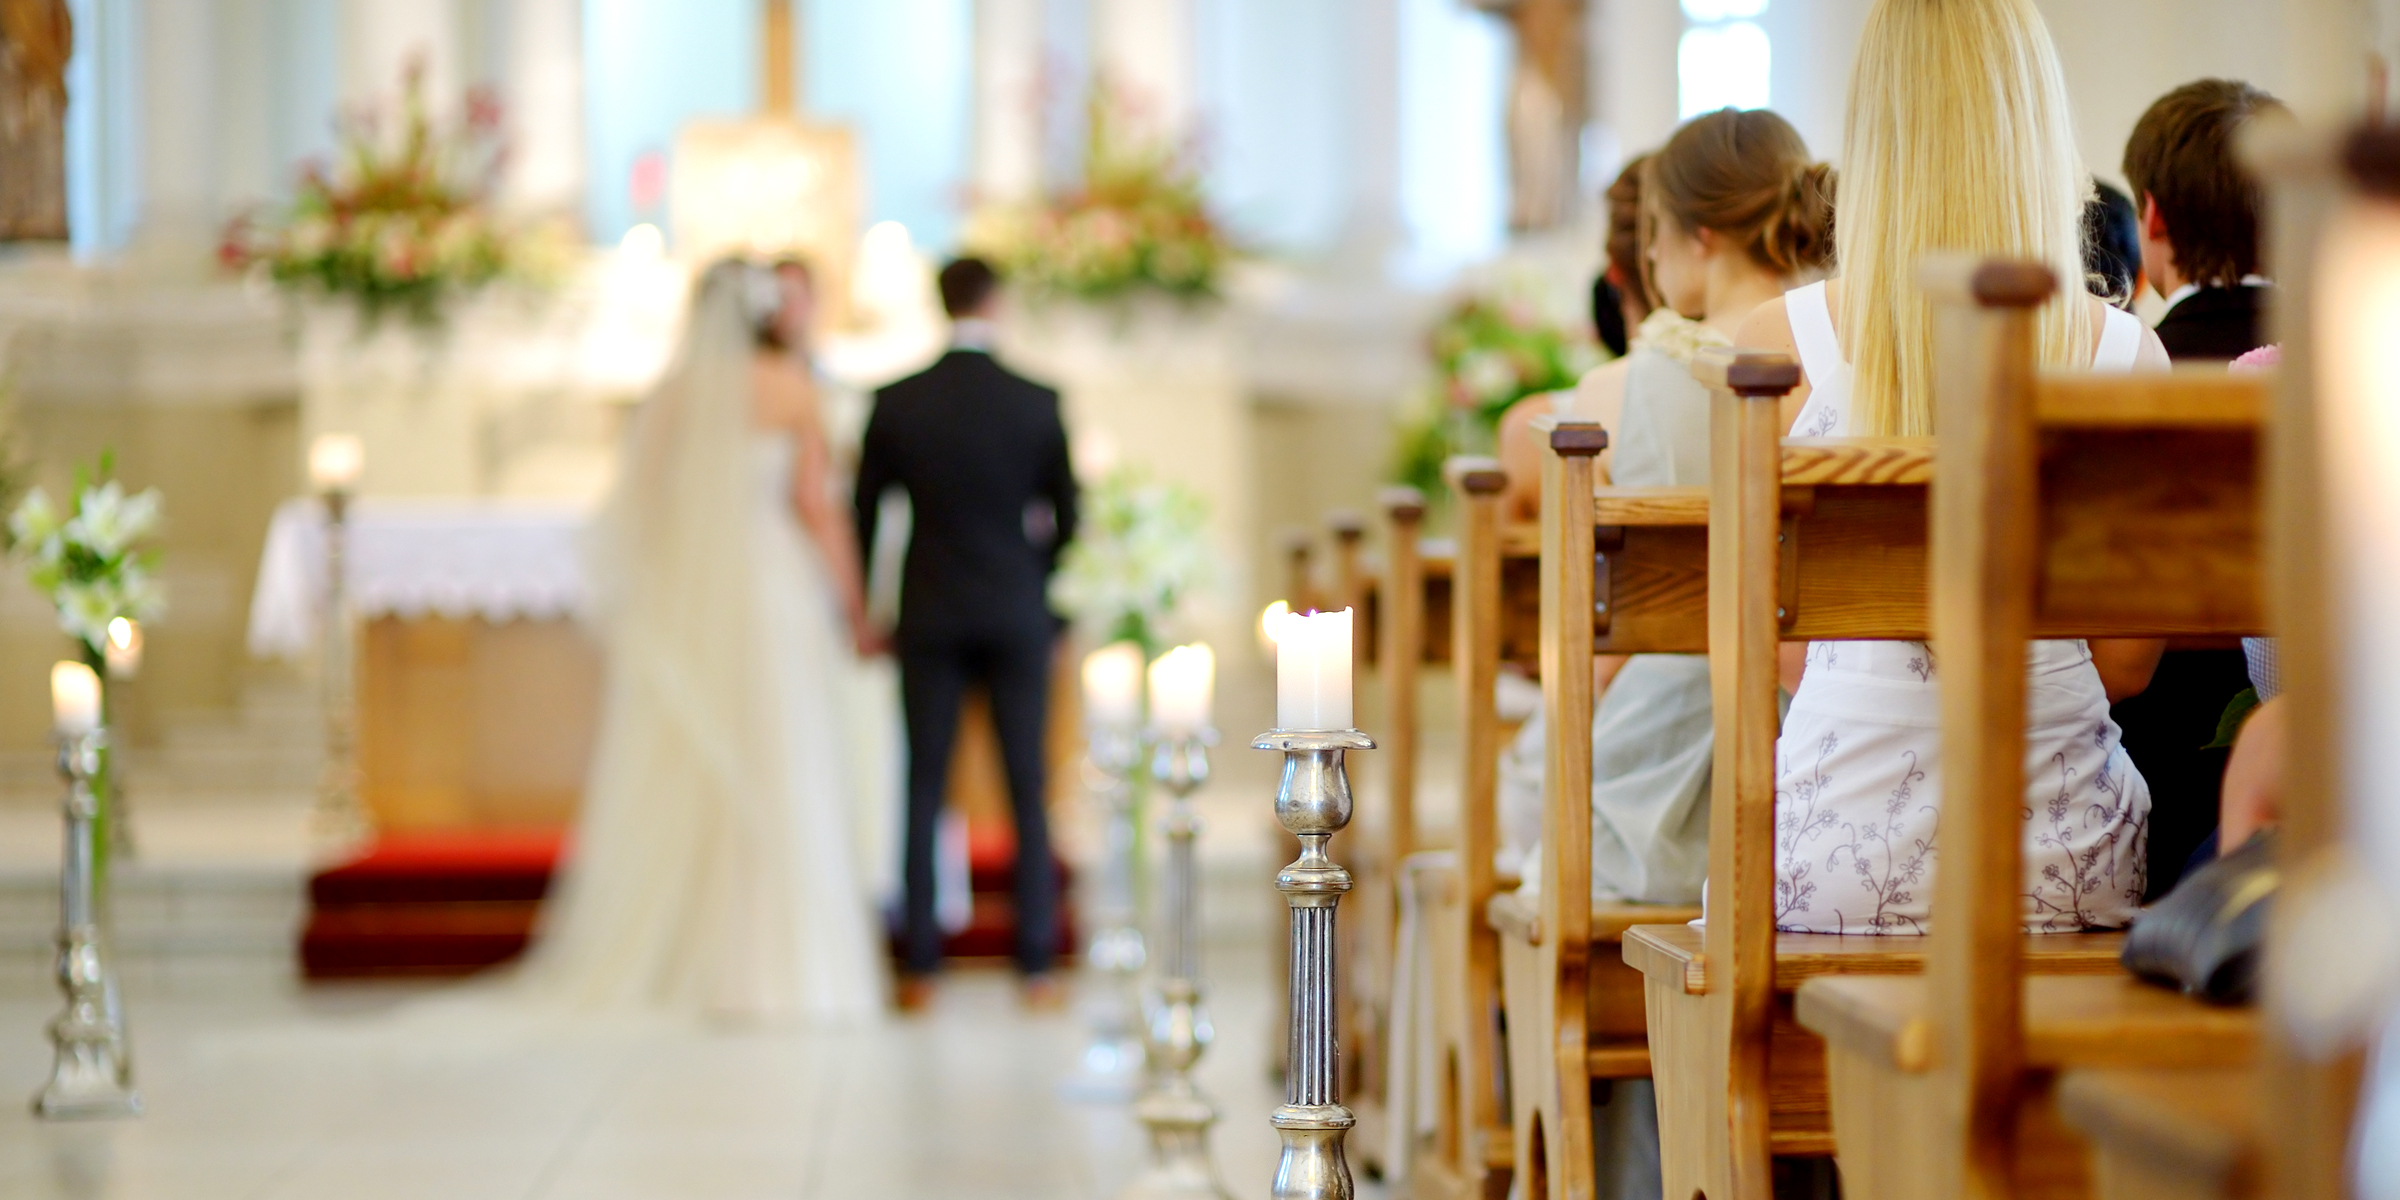 A bride and groom at the altar | Source: Shutterstock